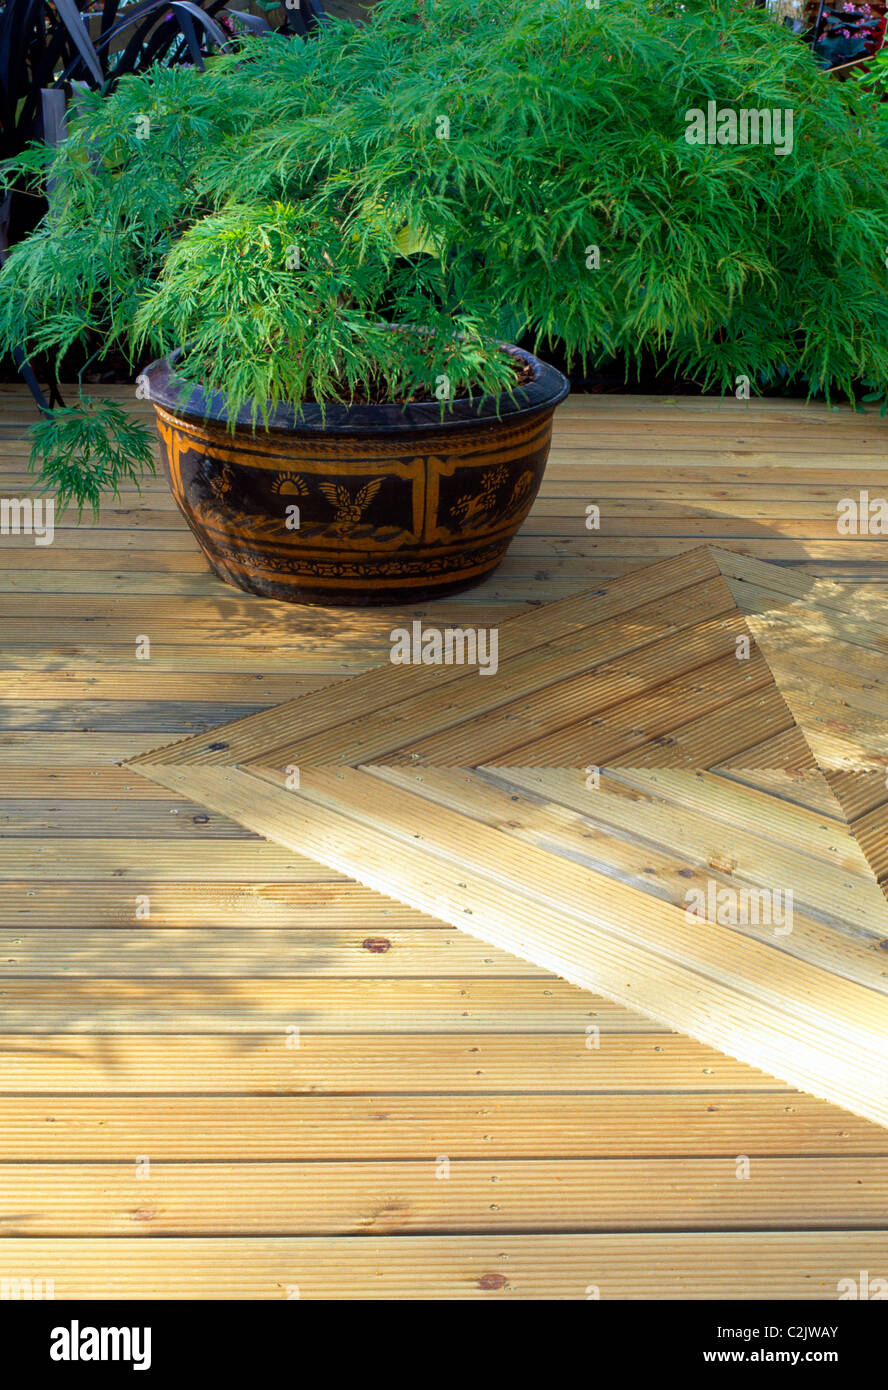 Decorative use of wooden deck in a garden Stock Photo